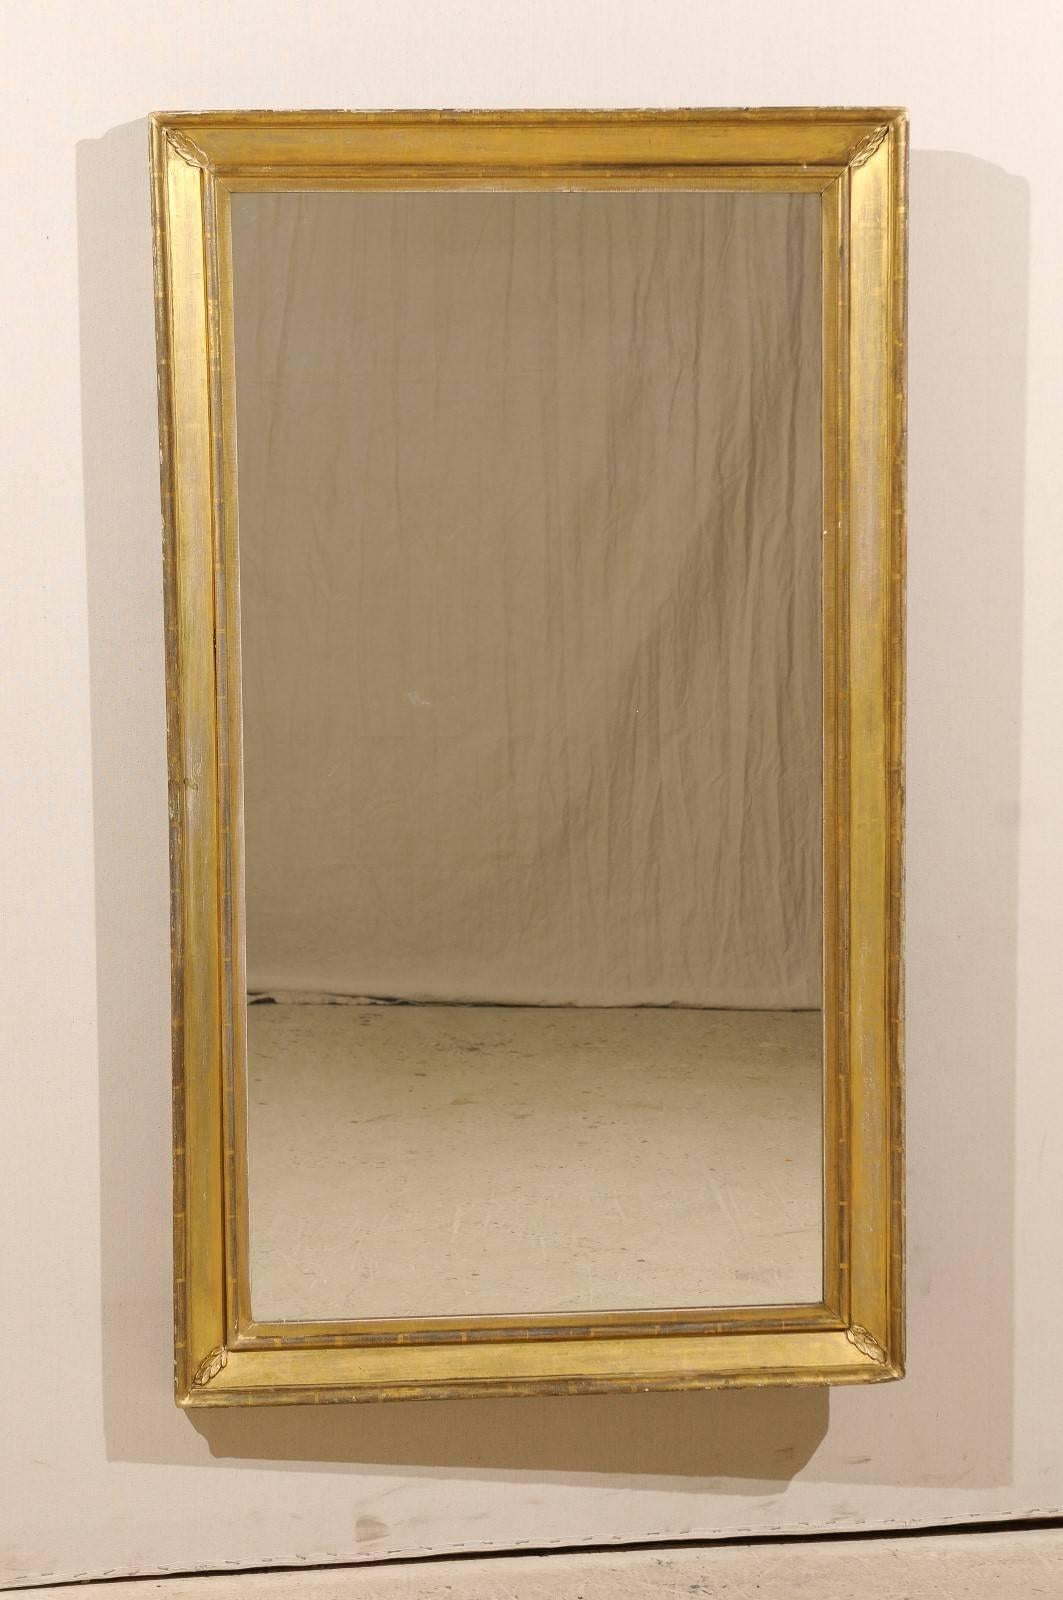 A 19th century French rectangular giltwood mirror with diagonal leaf motifs adorning each corner. This gold colored gilt mirror would add elegance to any space.